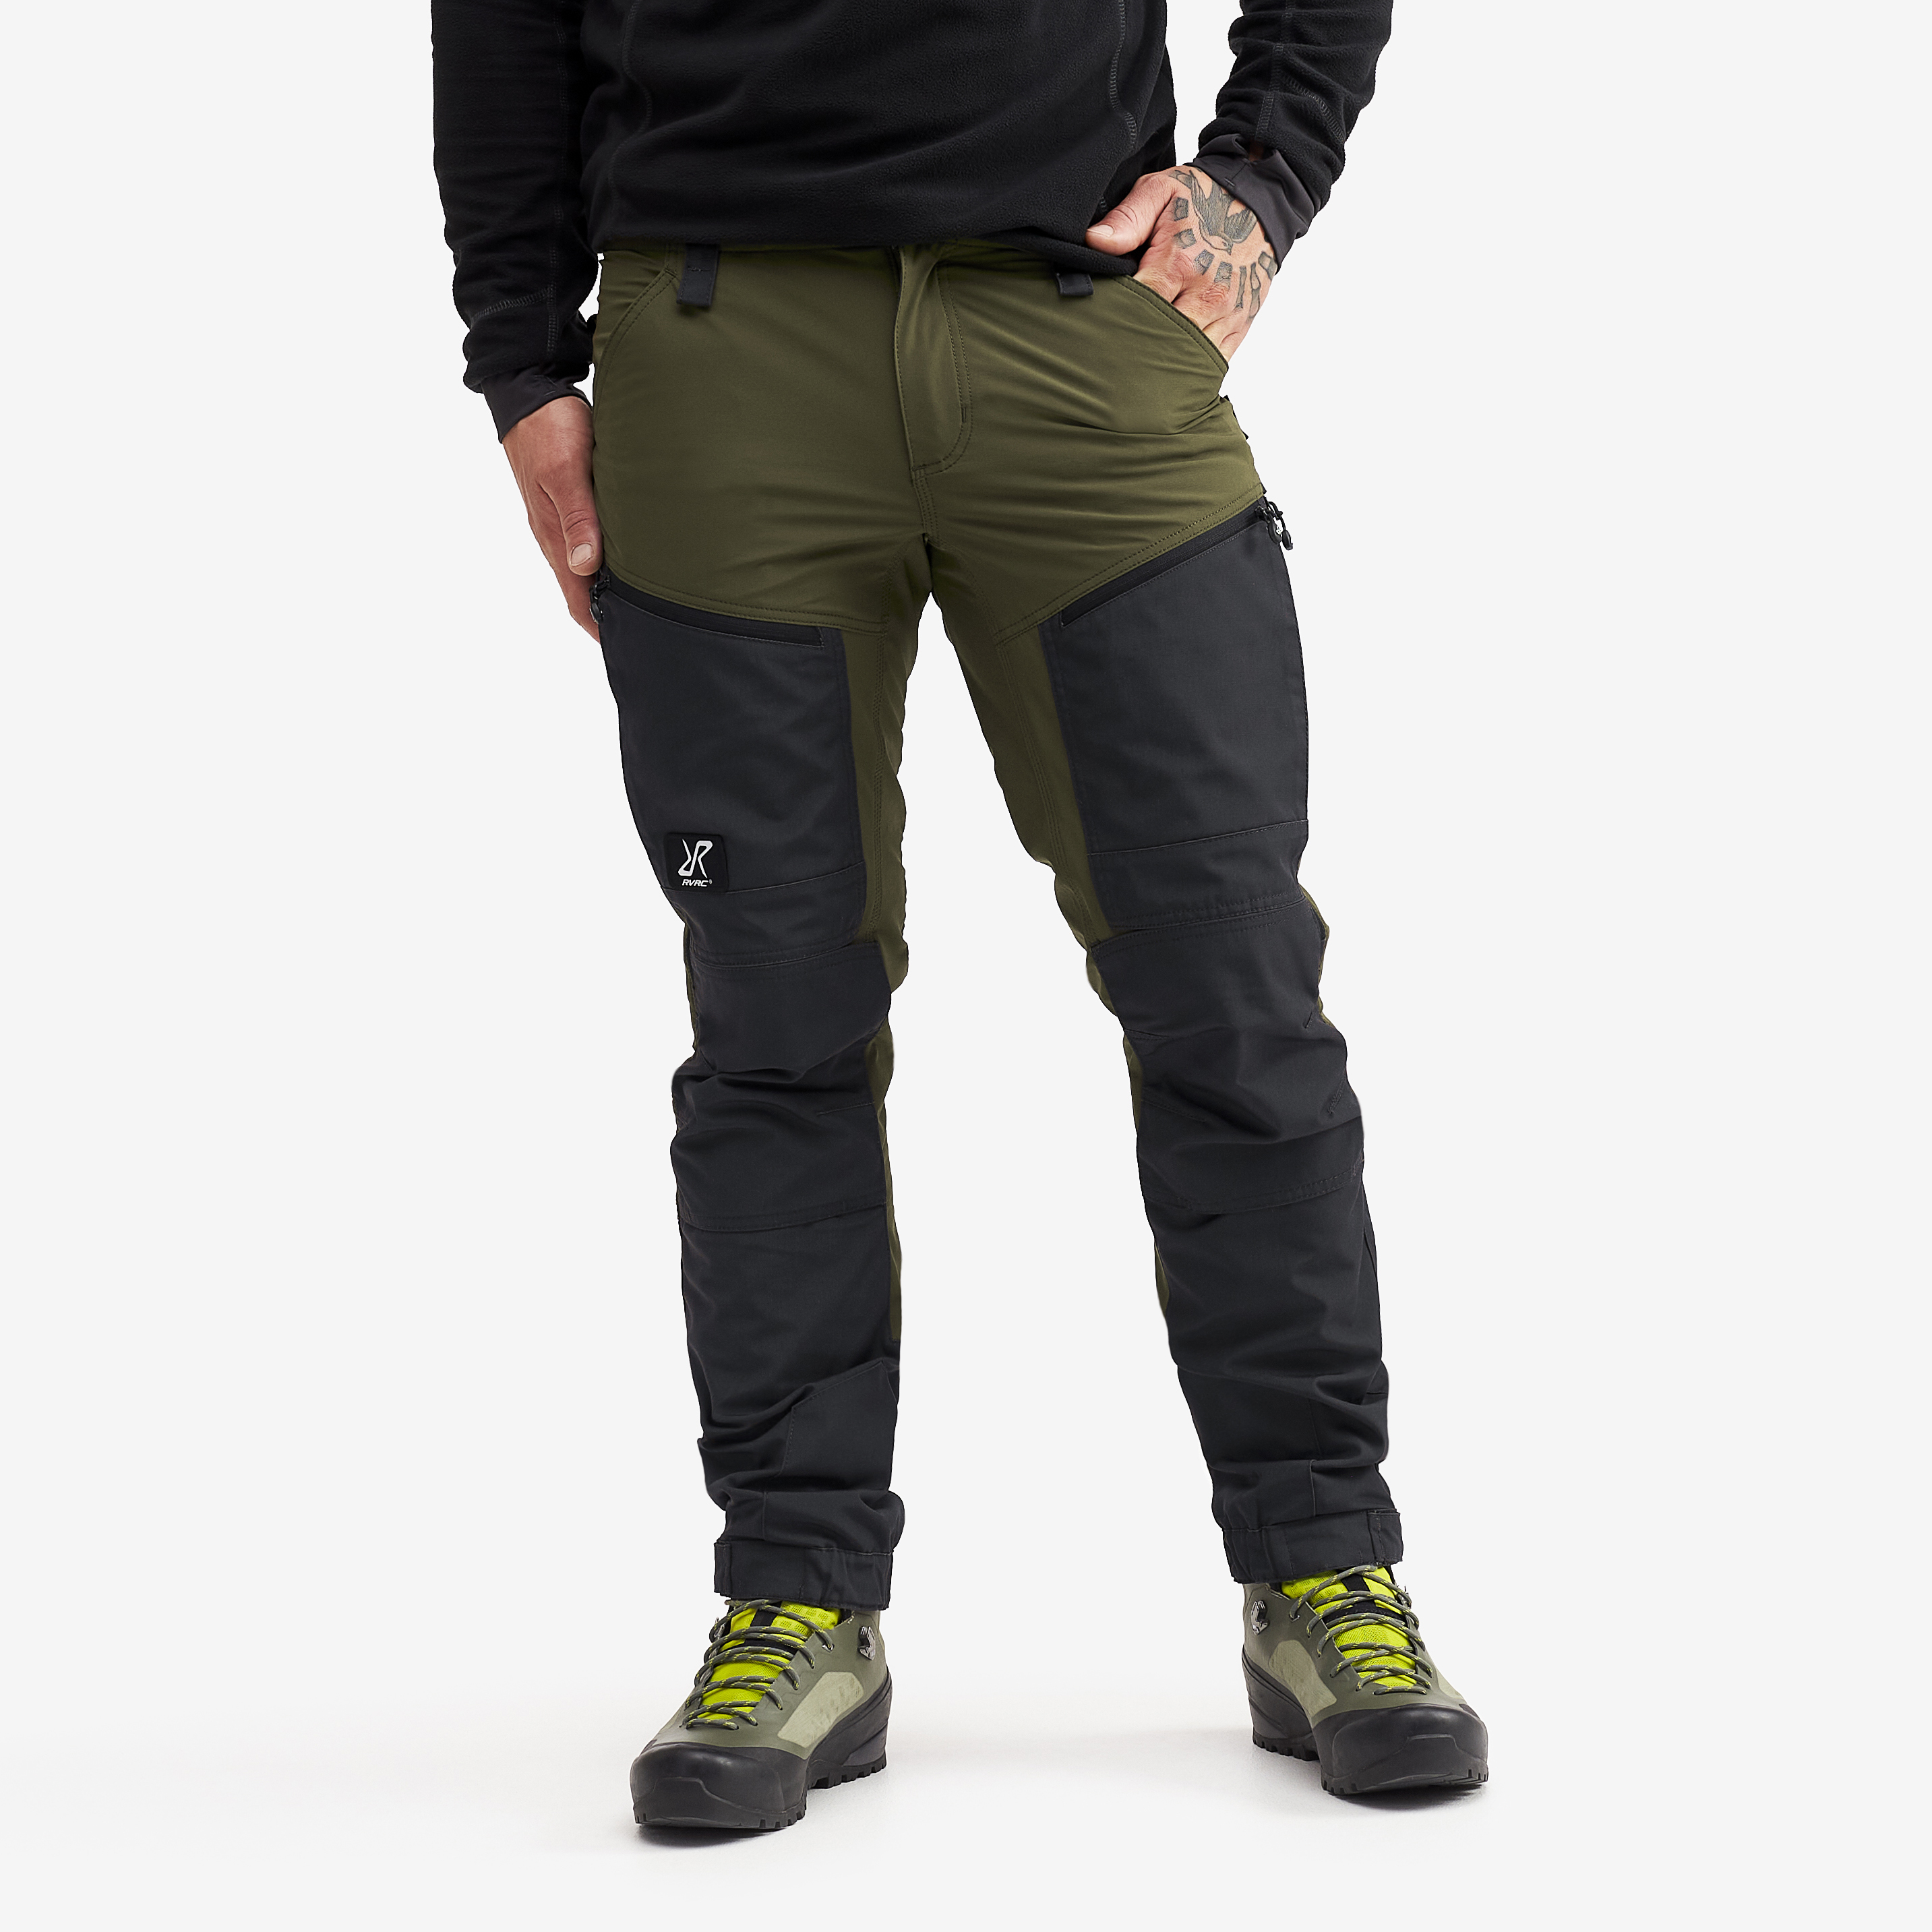 RVRC GP Pro Short hiking trousers for men in green